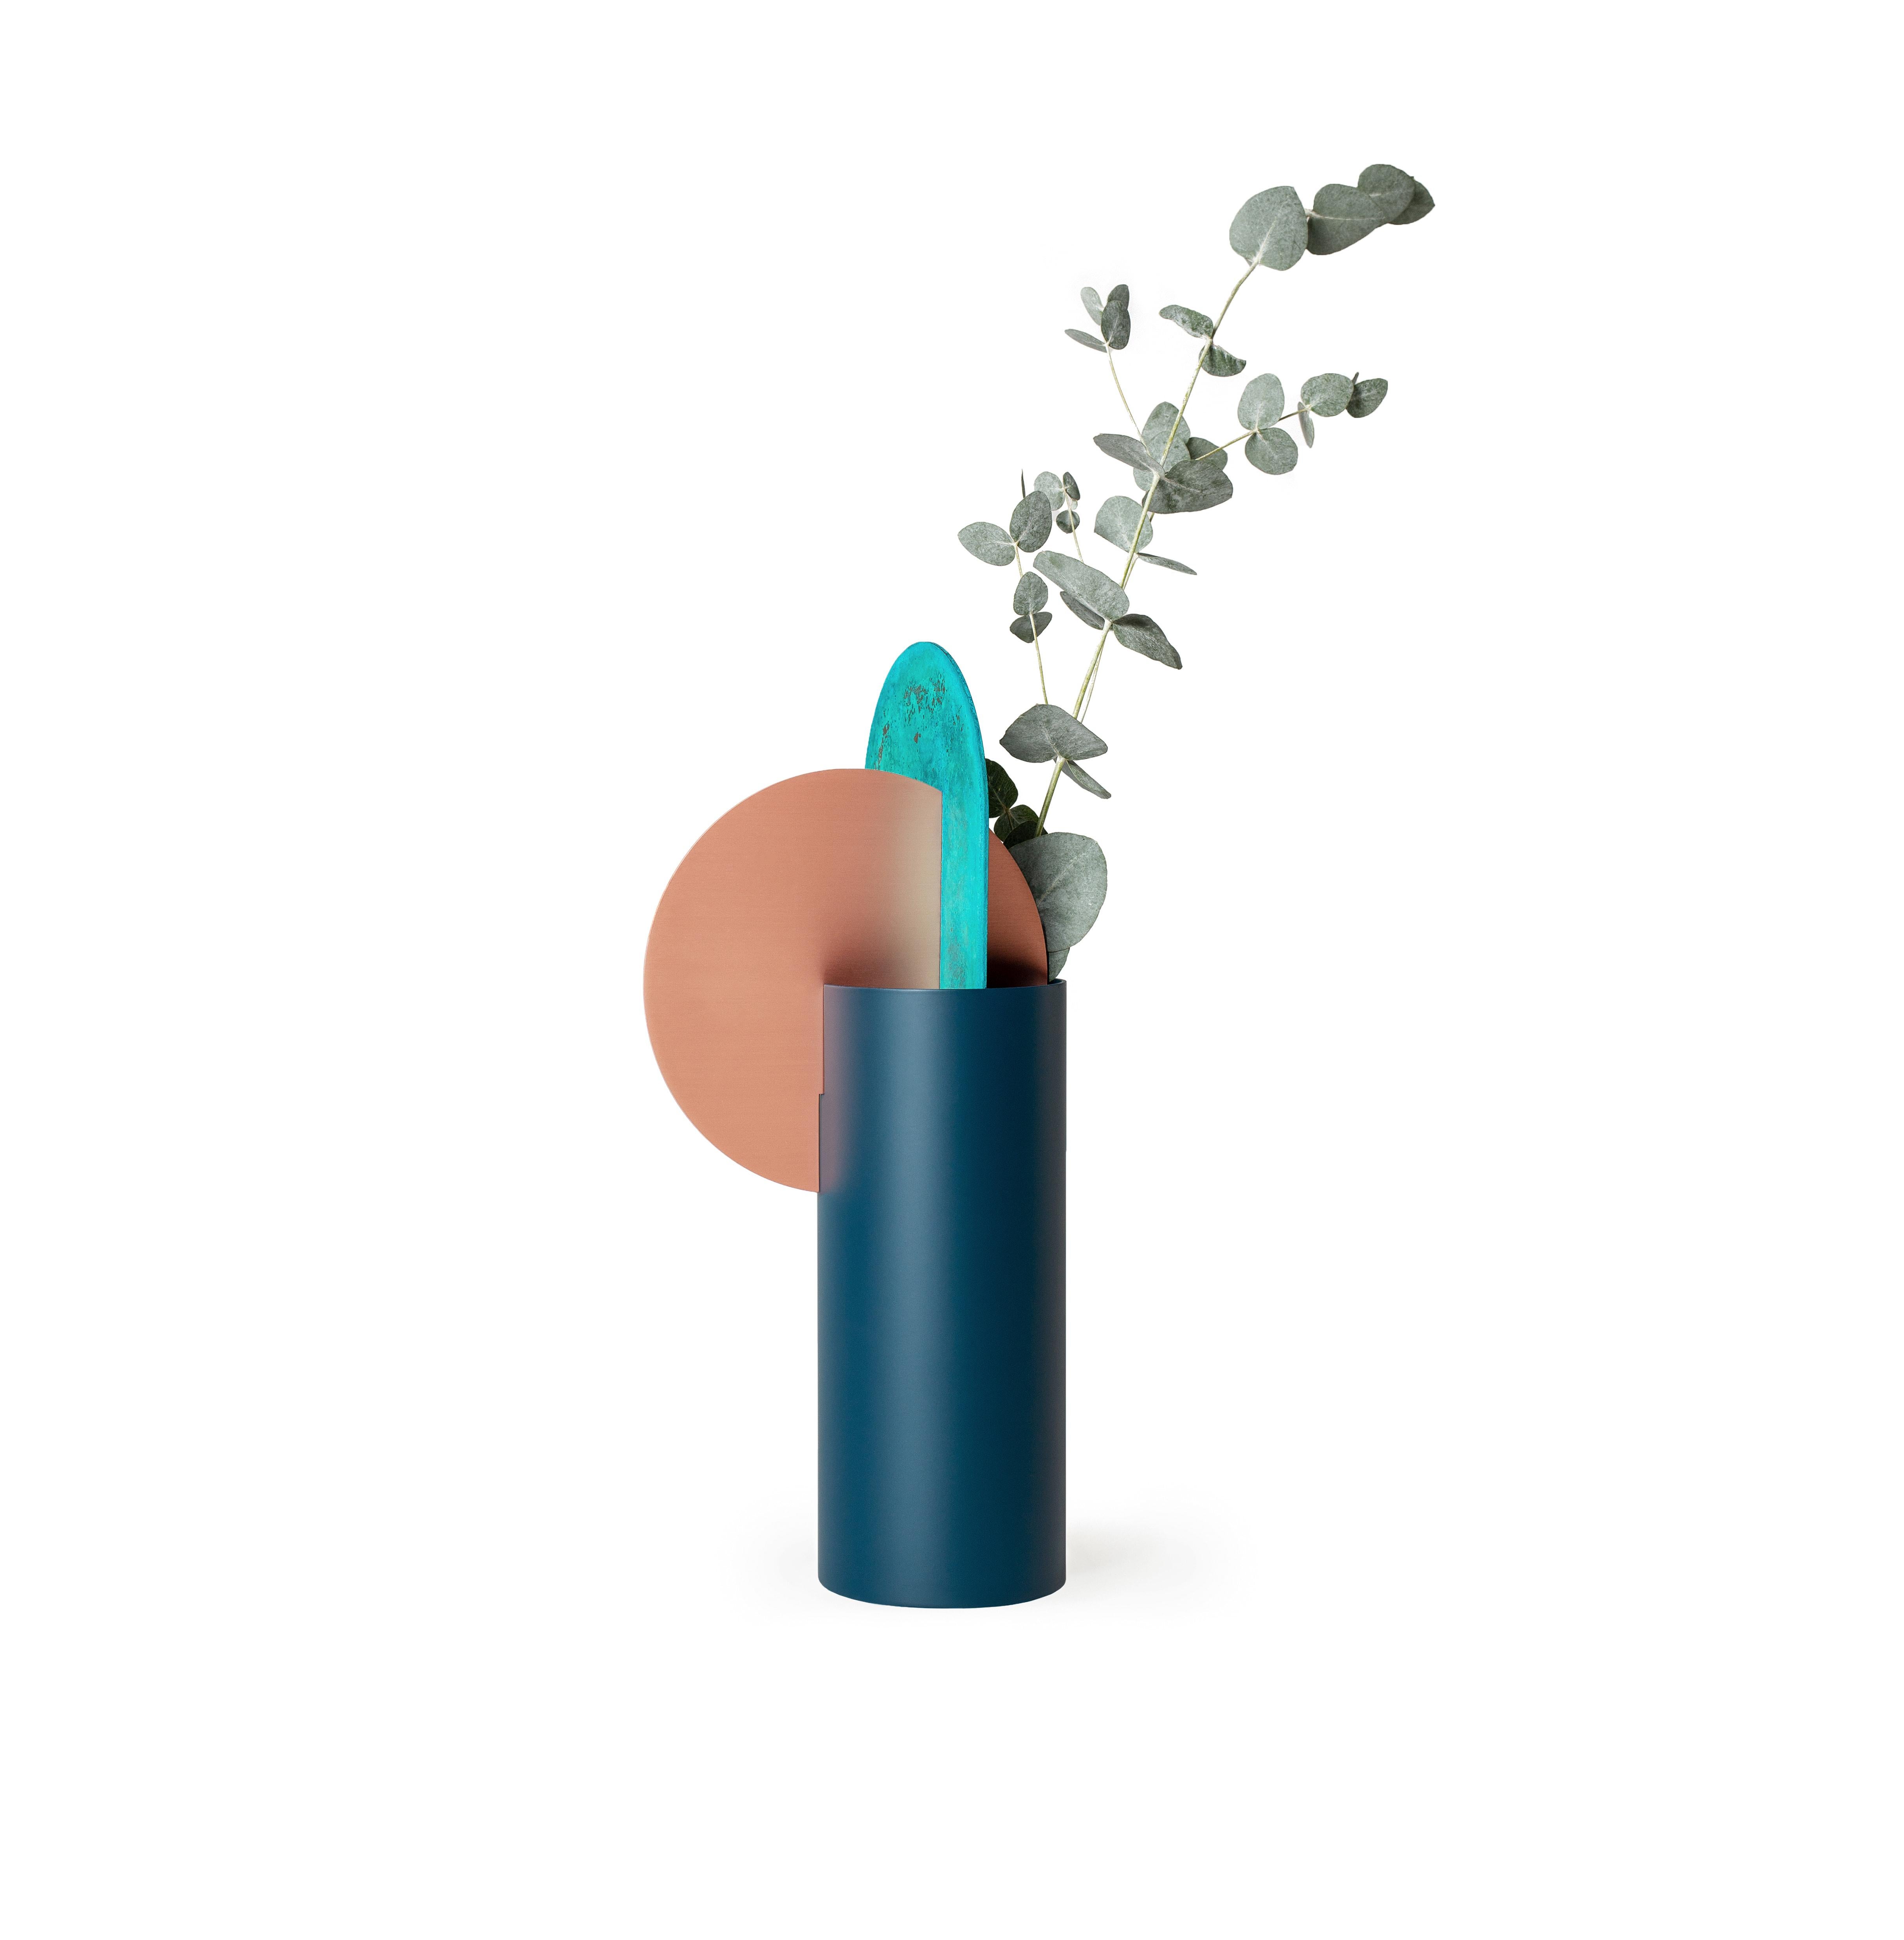 Limited Edition Modern Vase Yermilov CSL2 by NOOM in Oxidized Copper and Steel 1